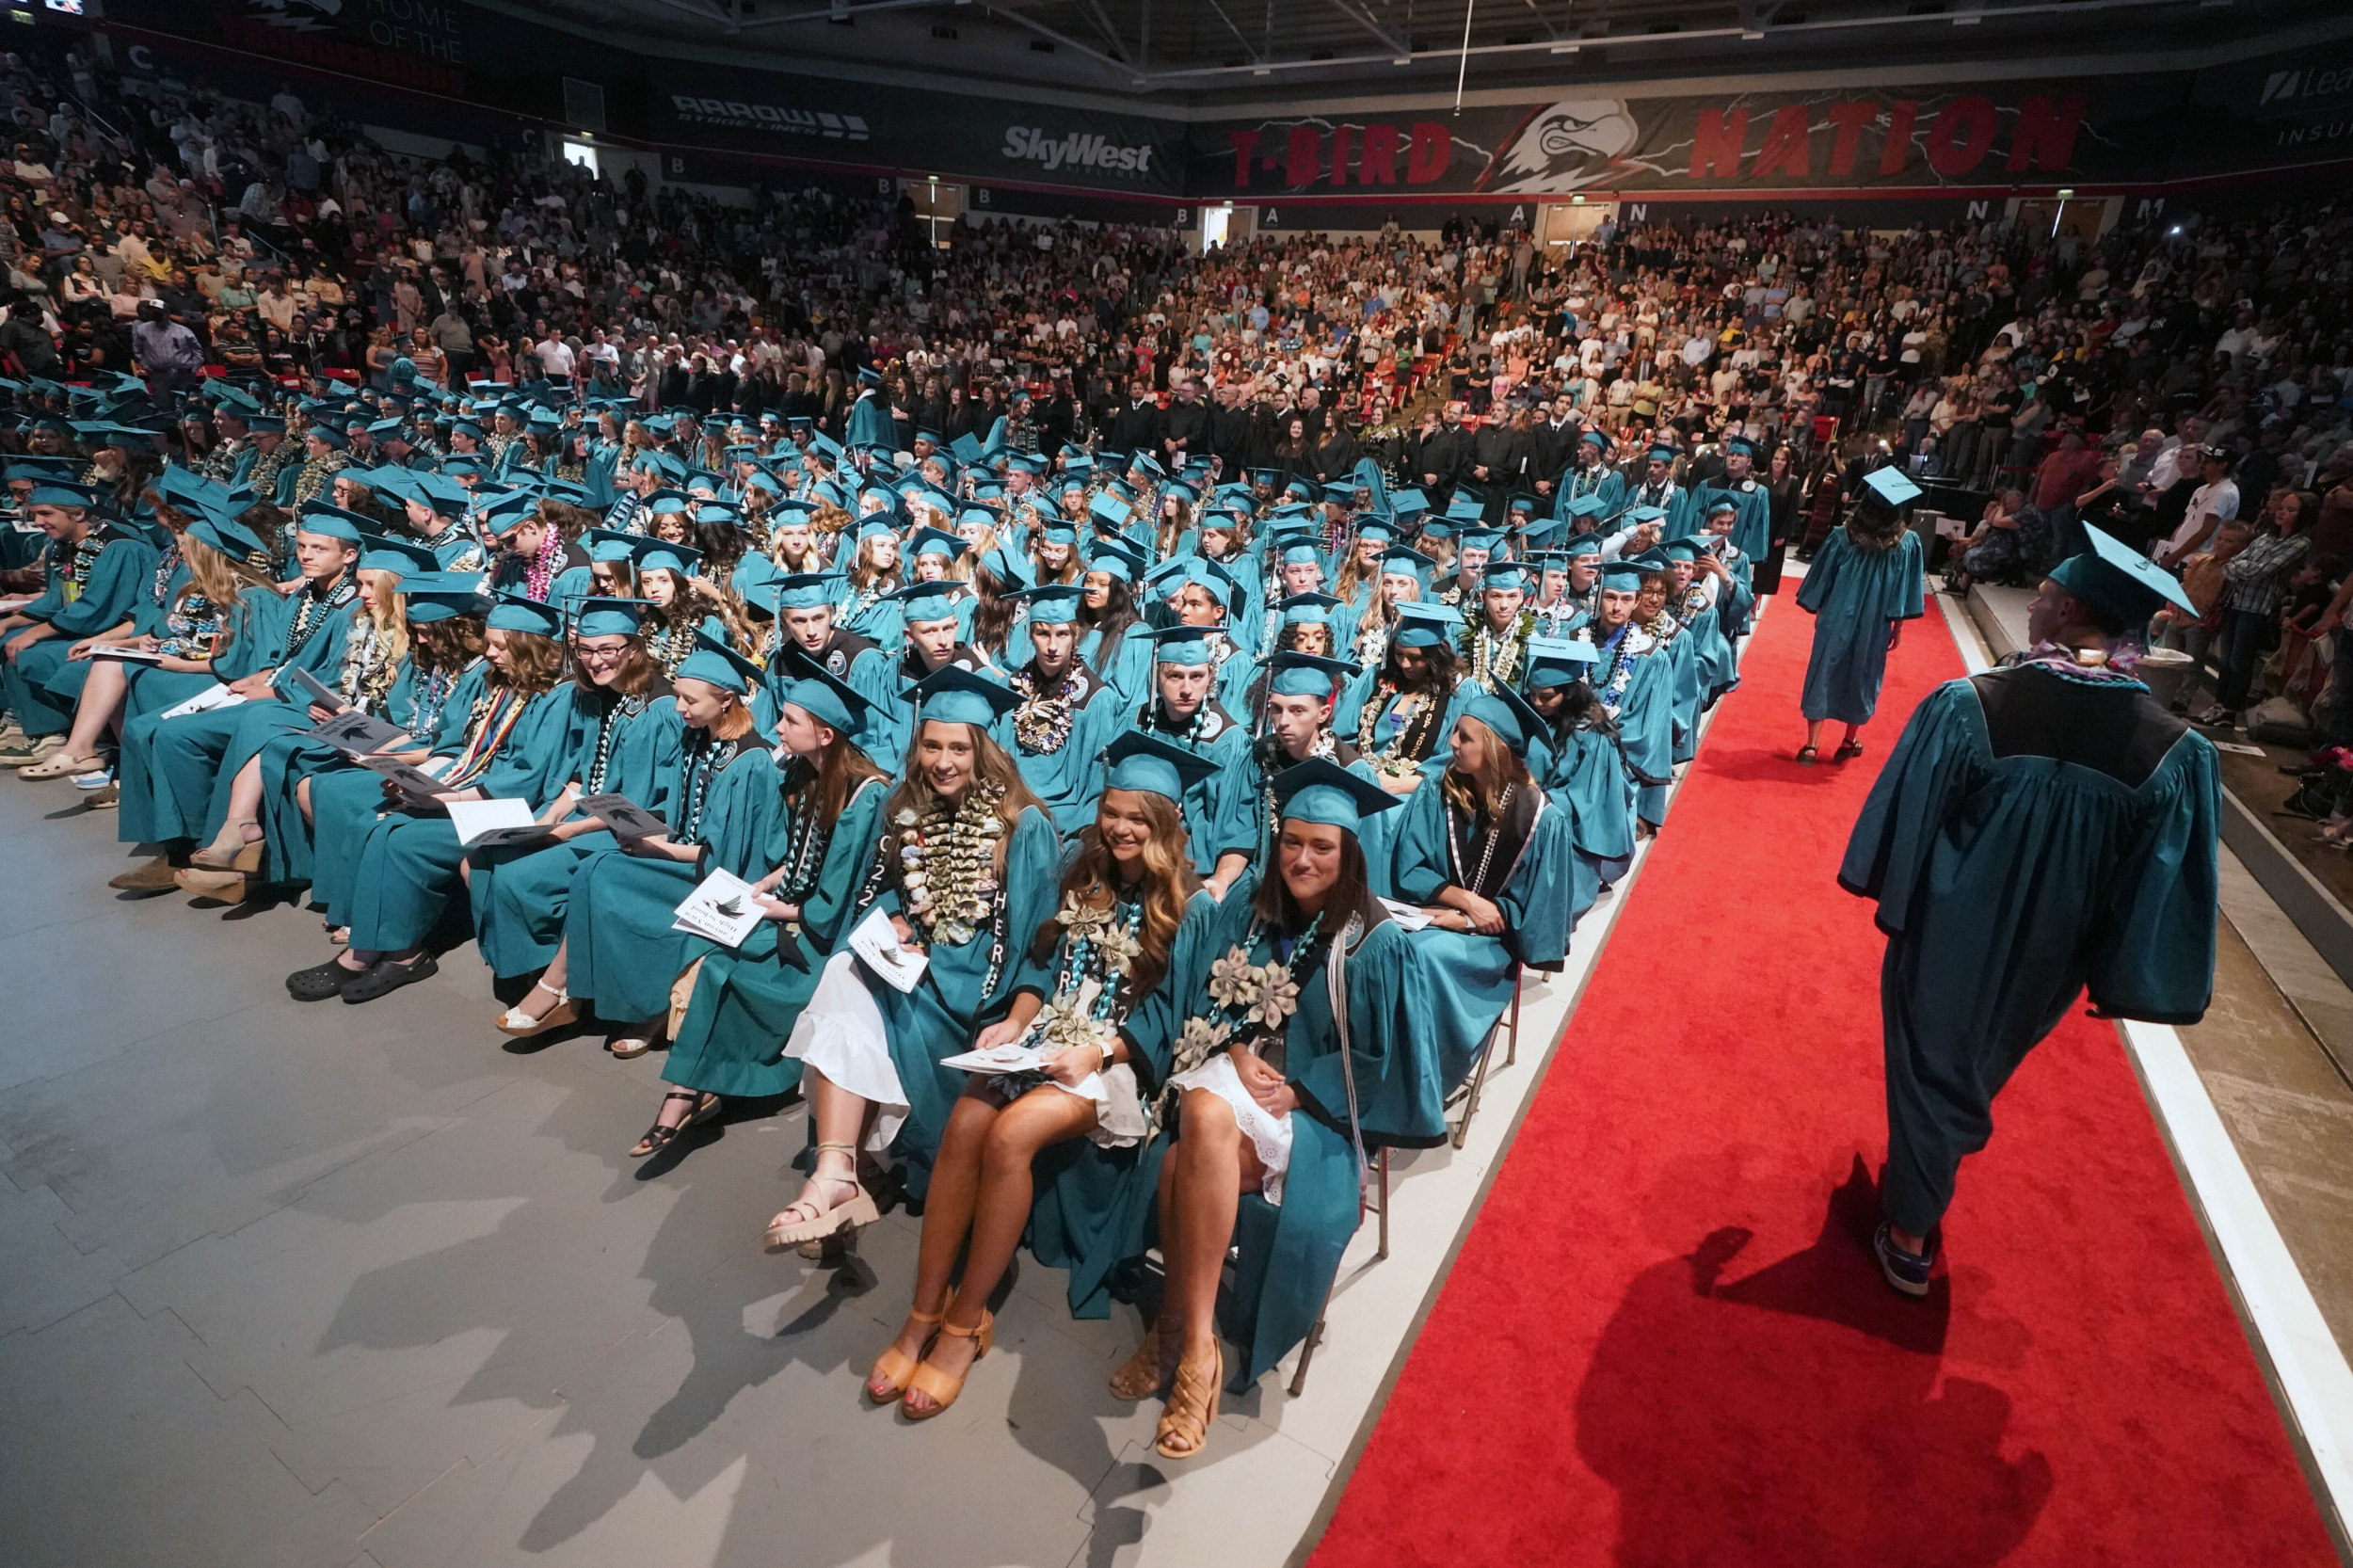 Indigenous Graduation Regalia: Large auditorium is filled with seated graduates wearing turquoise graduation caps and downs.